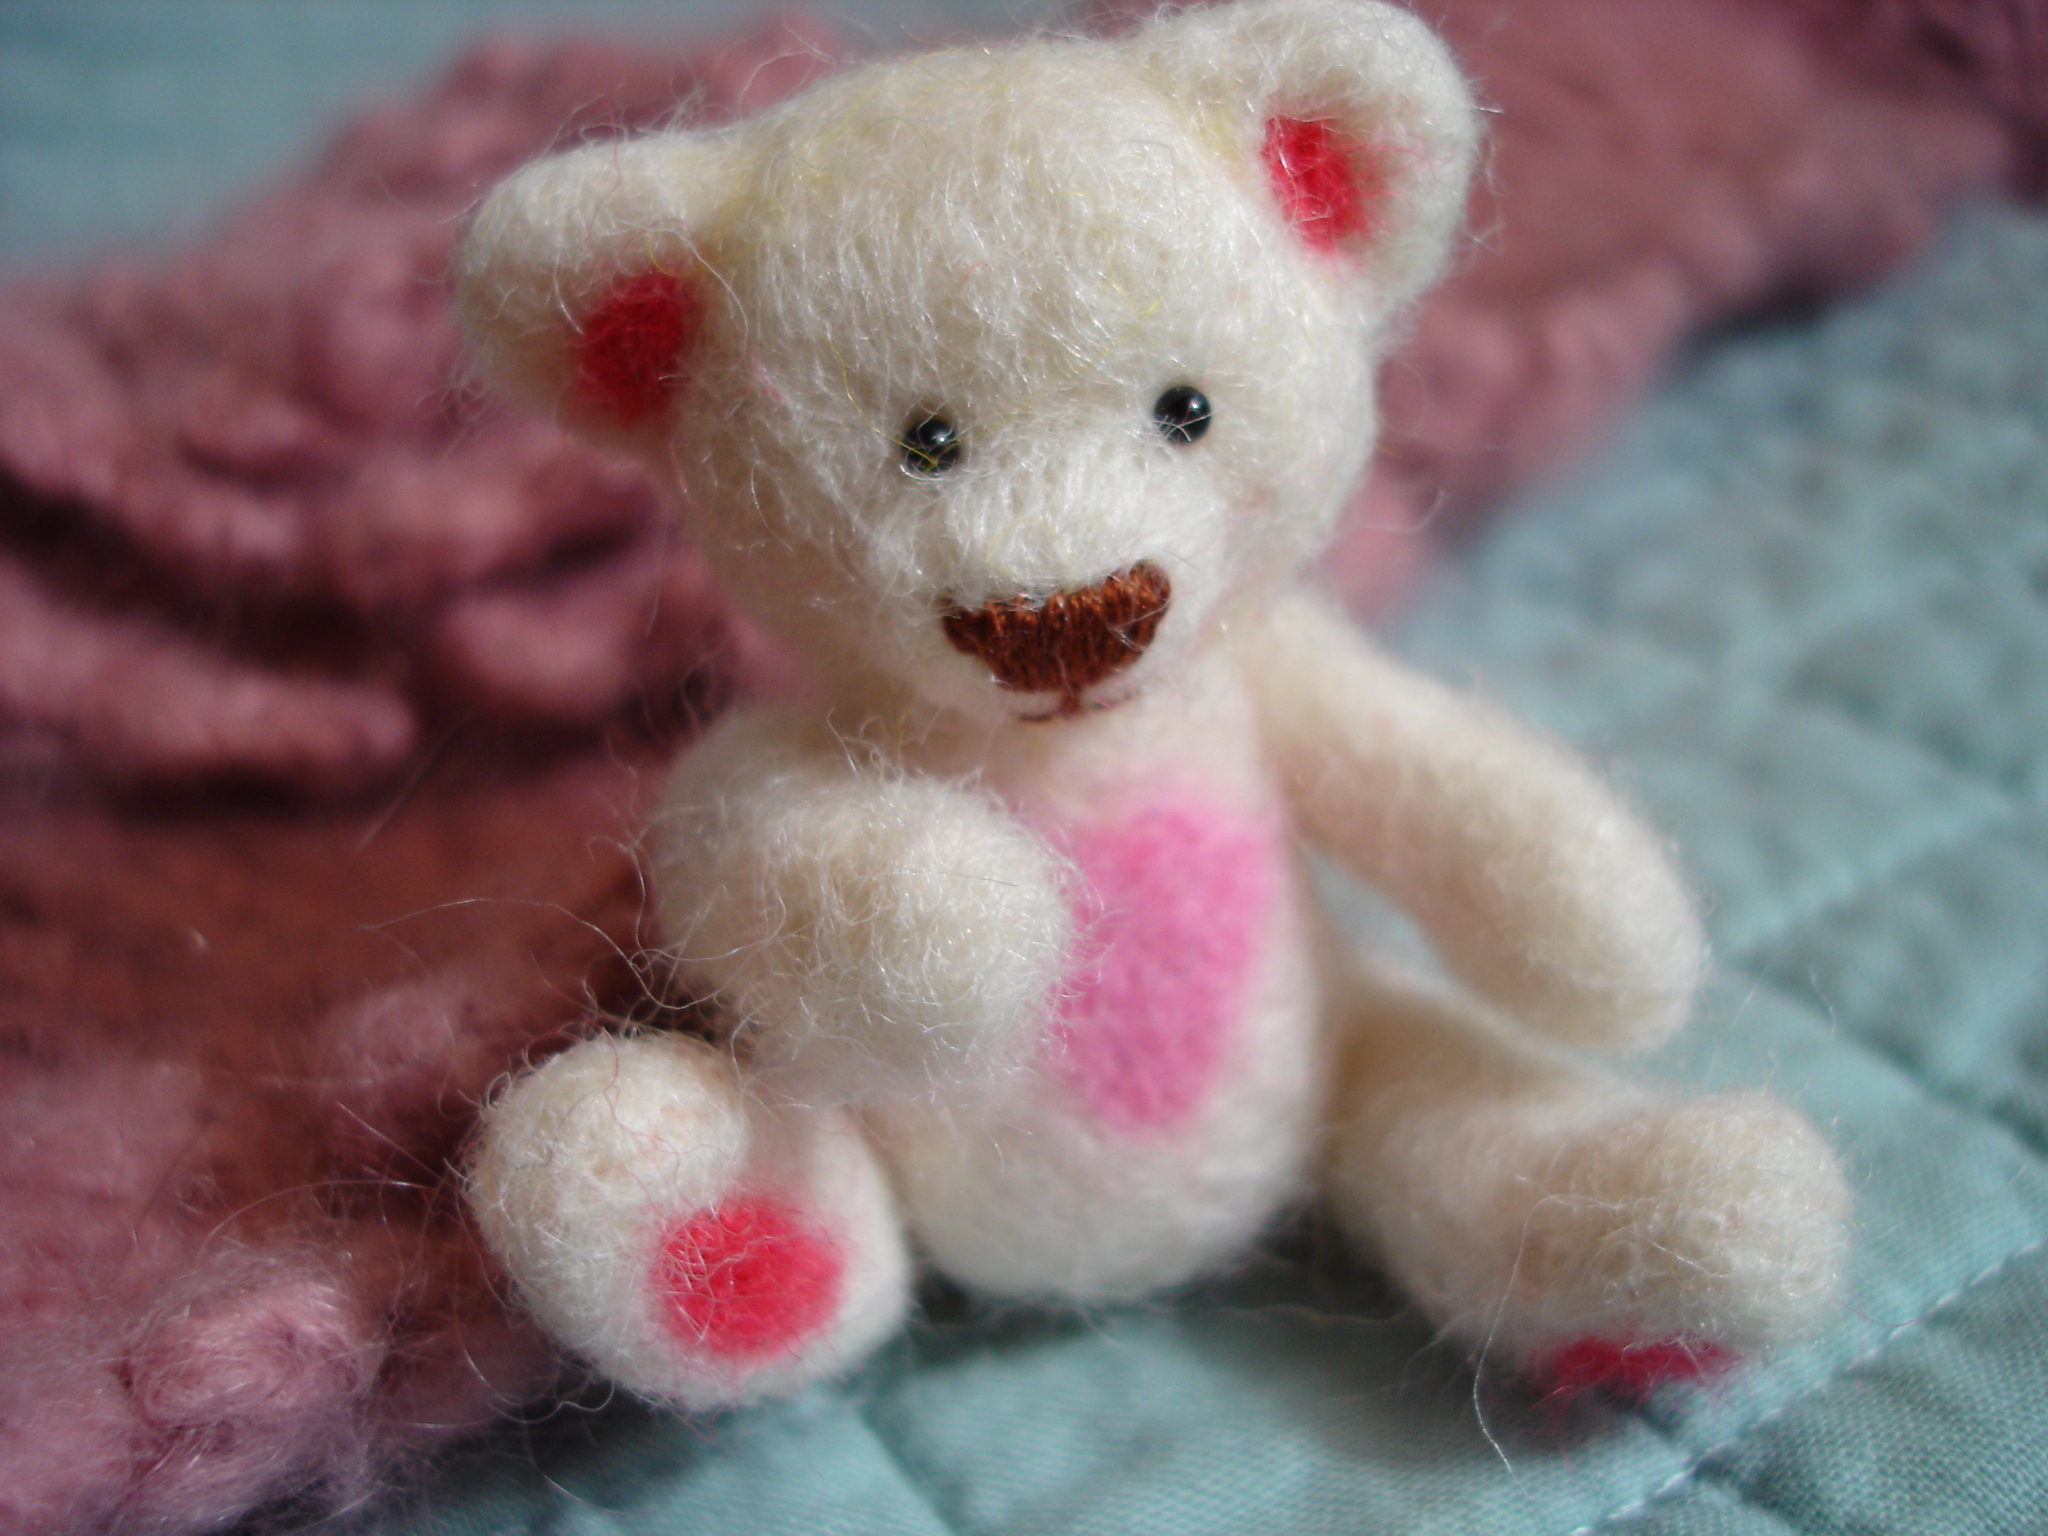 a white stuffed animal with pink spots on it